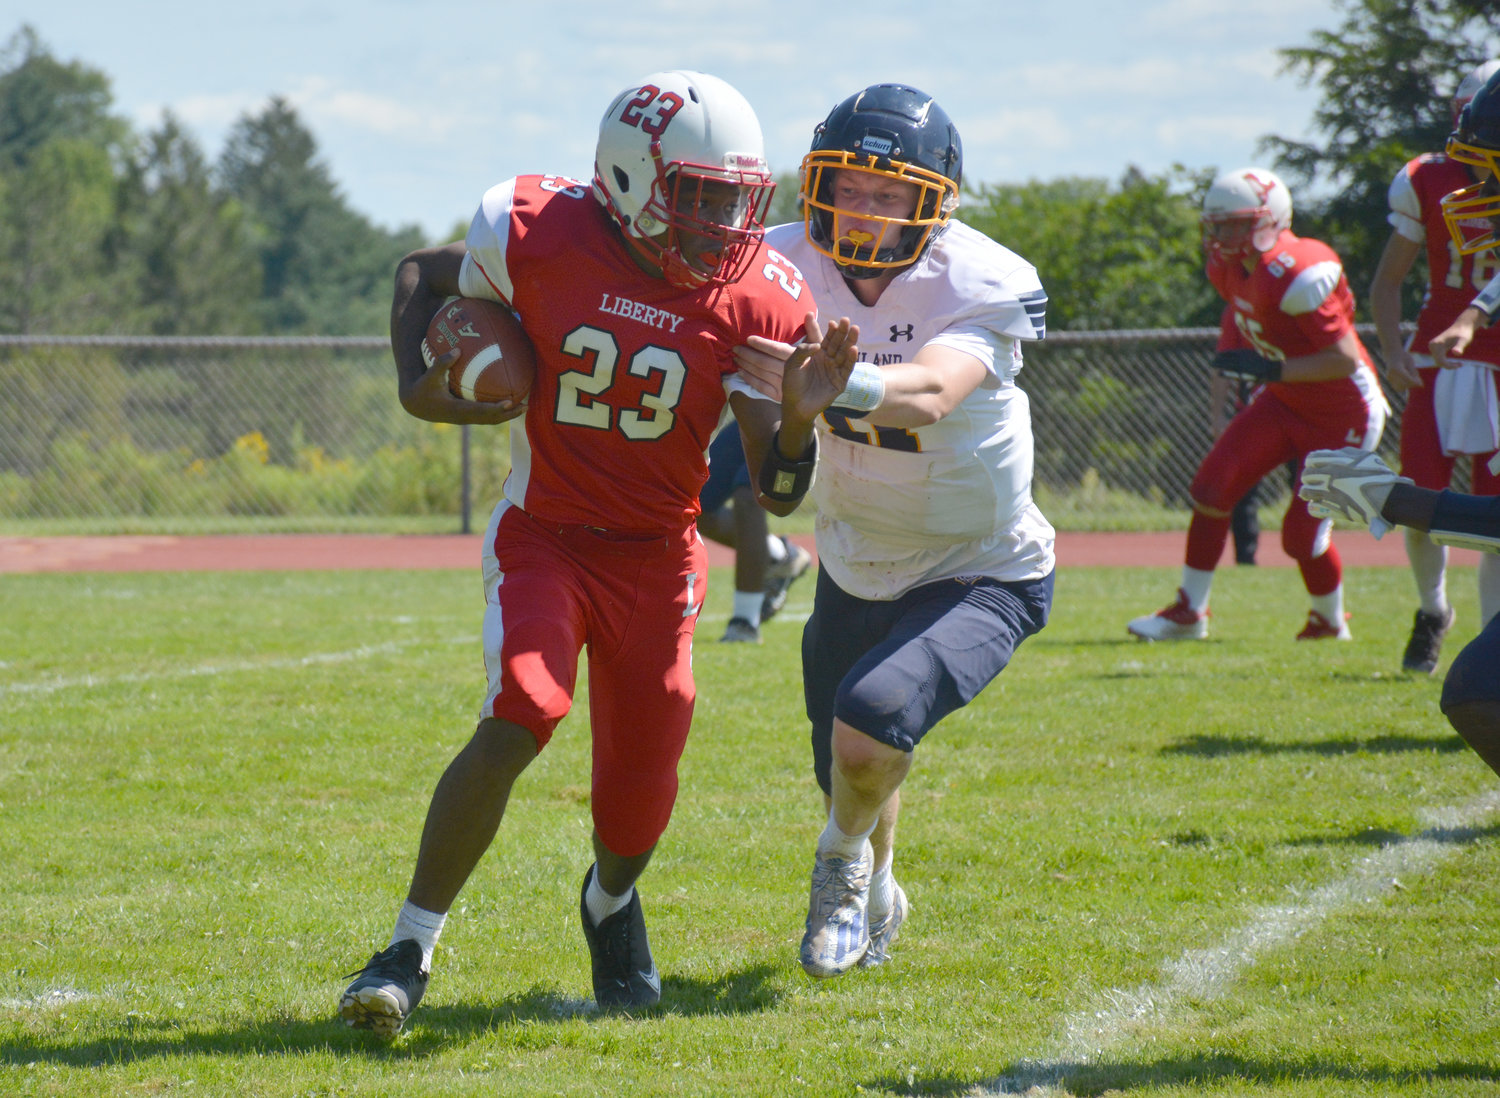 Liberty’s Giovanni Dudley evades a Highland defender. The Indians fell to the Huskies, 32-6, in their season opener last Saturday. Liberty Coach Adam Lake said despite the loss, several positives came from the game. To read the full story about the game, visit scdemocratonline.com.